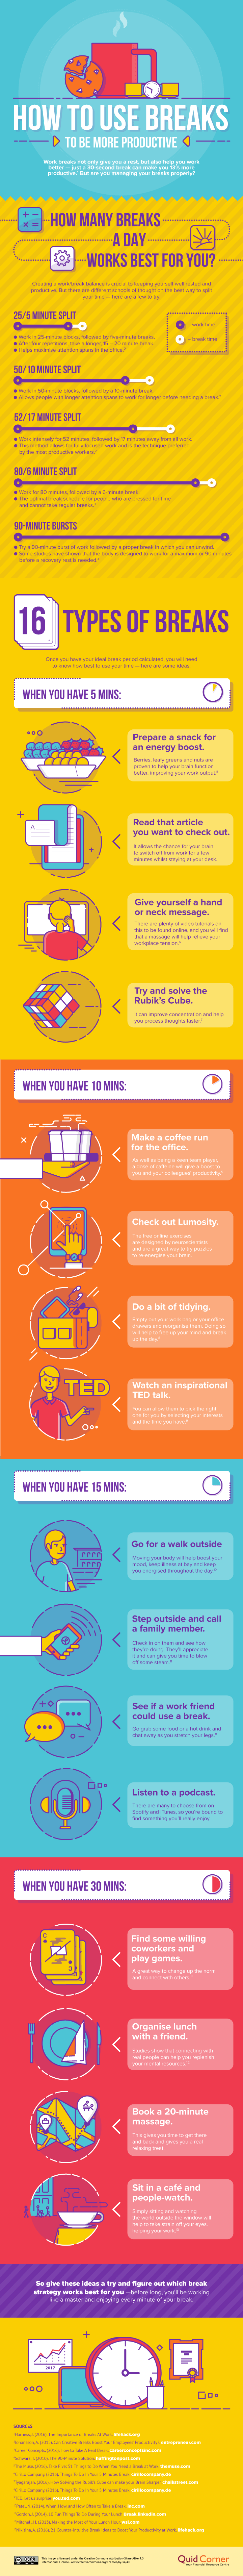 How to Use Breaks to Be More Productive Infographic